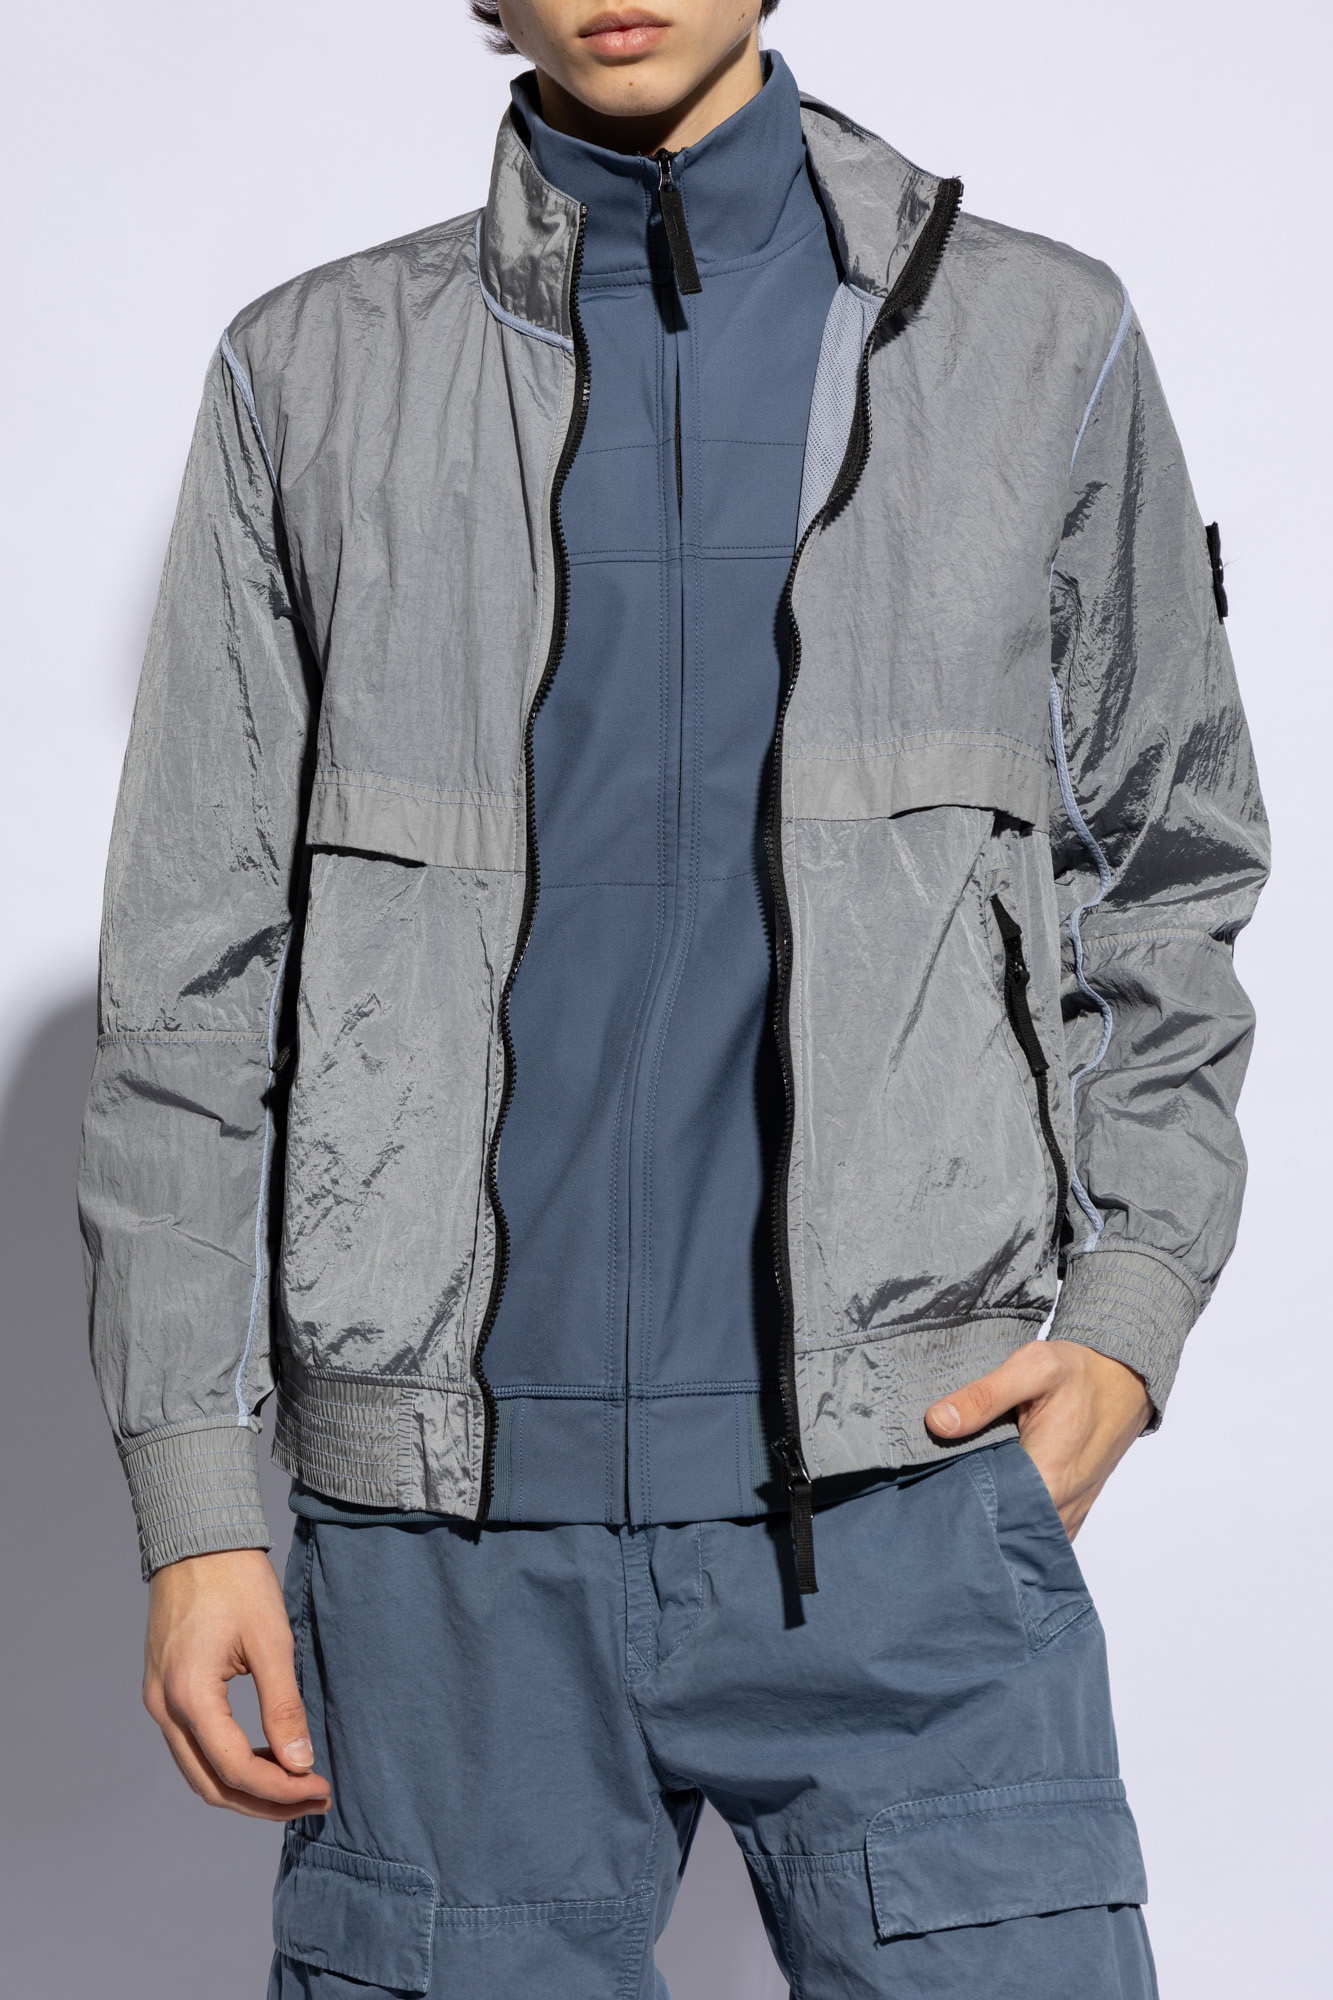 Stone Island Jacket with a stand-up collar | Men's Clothing | Vitkac